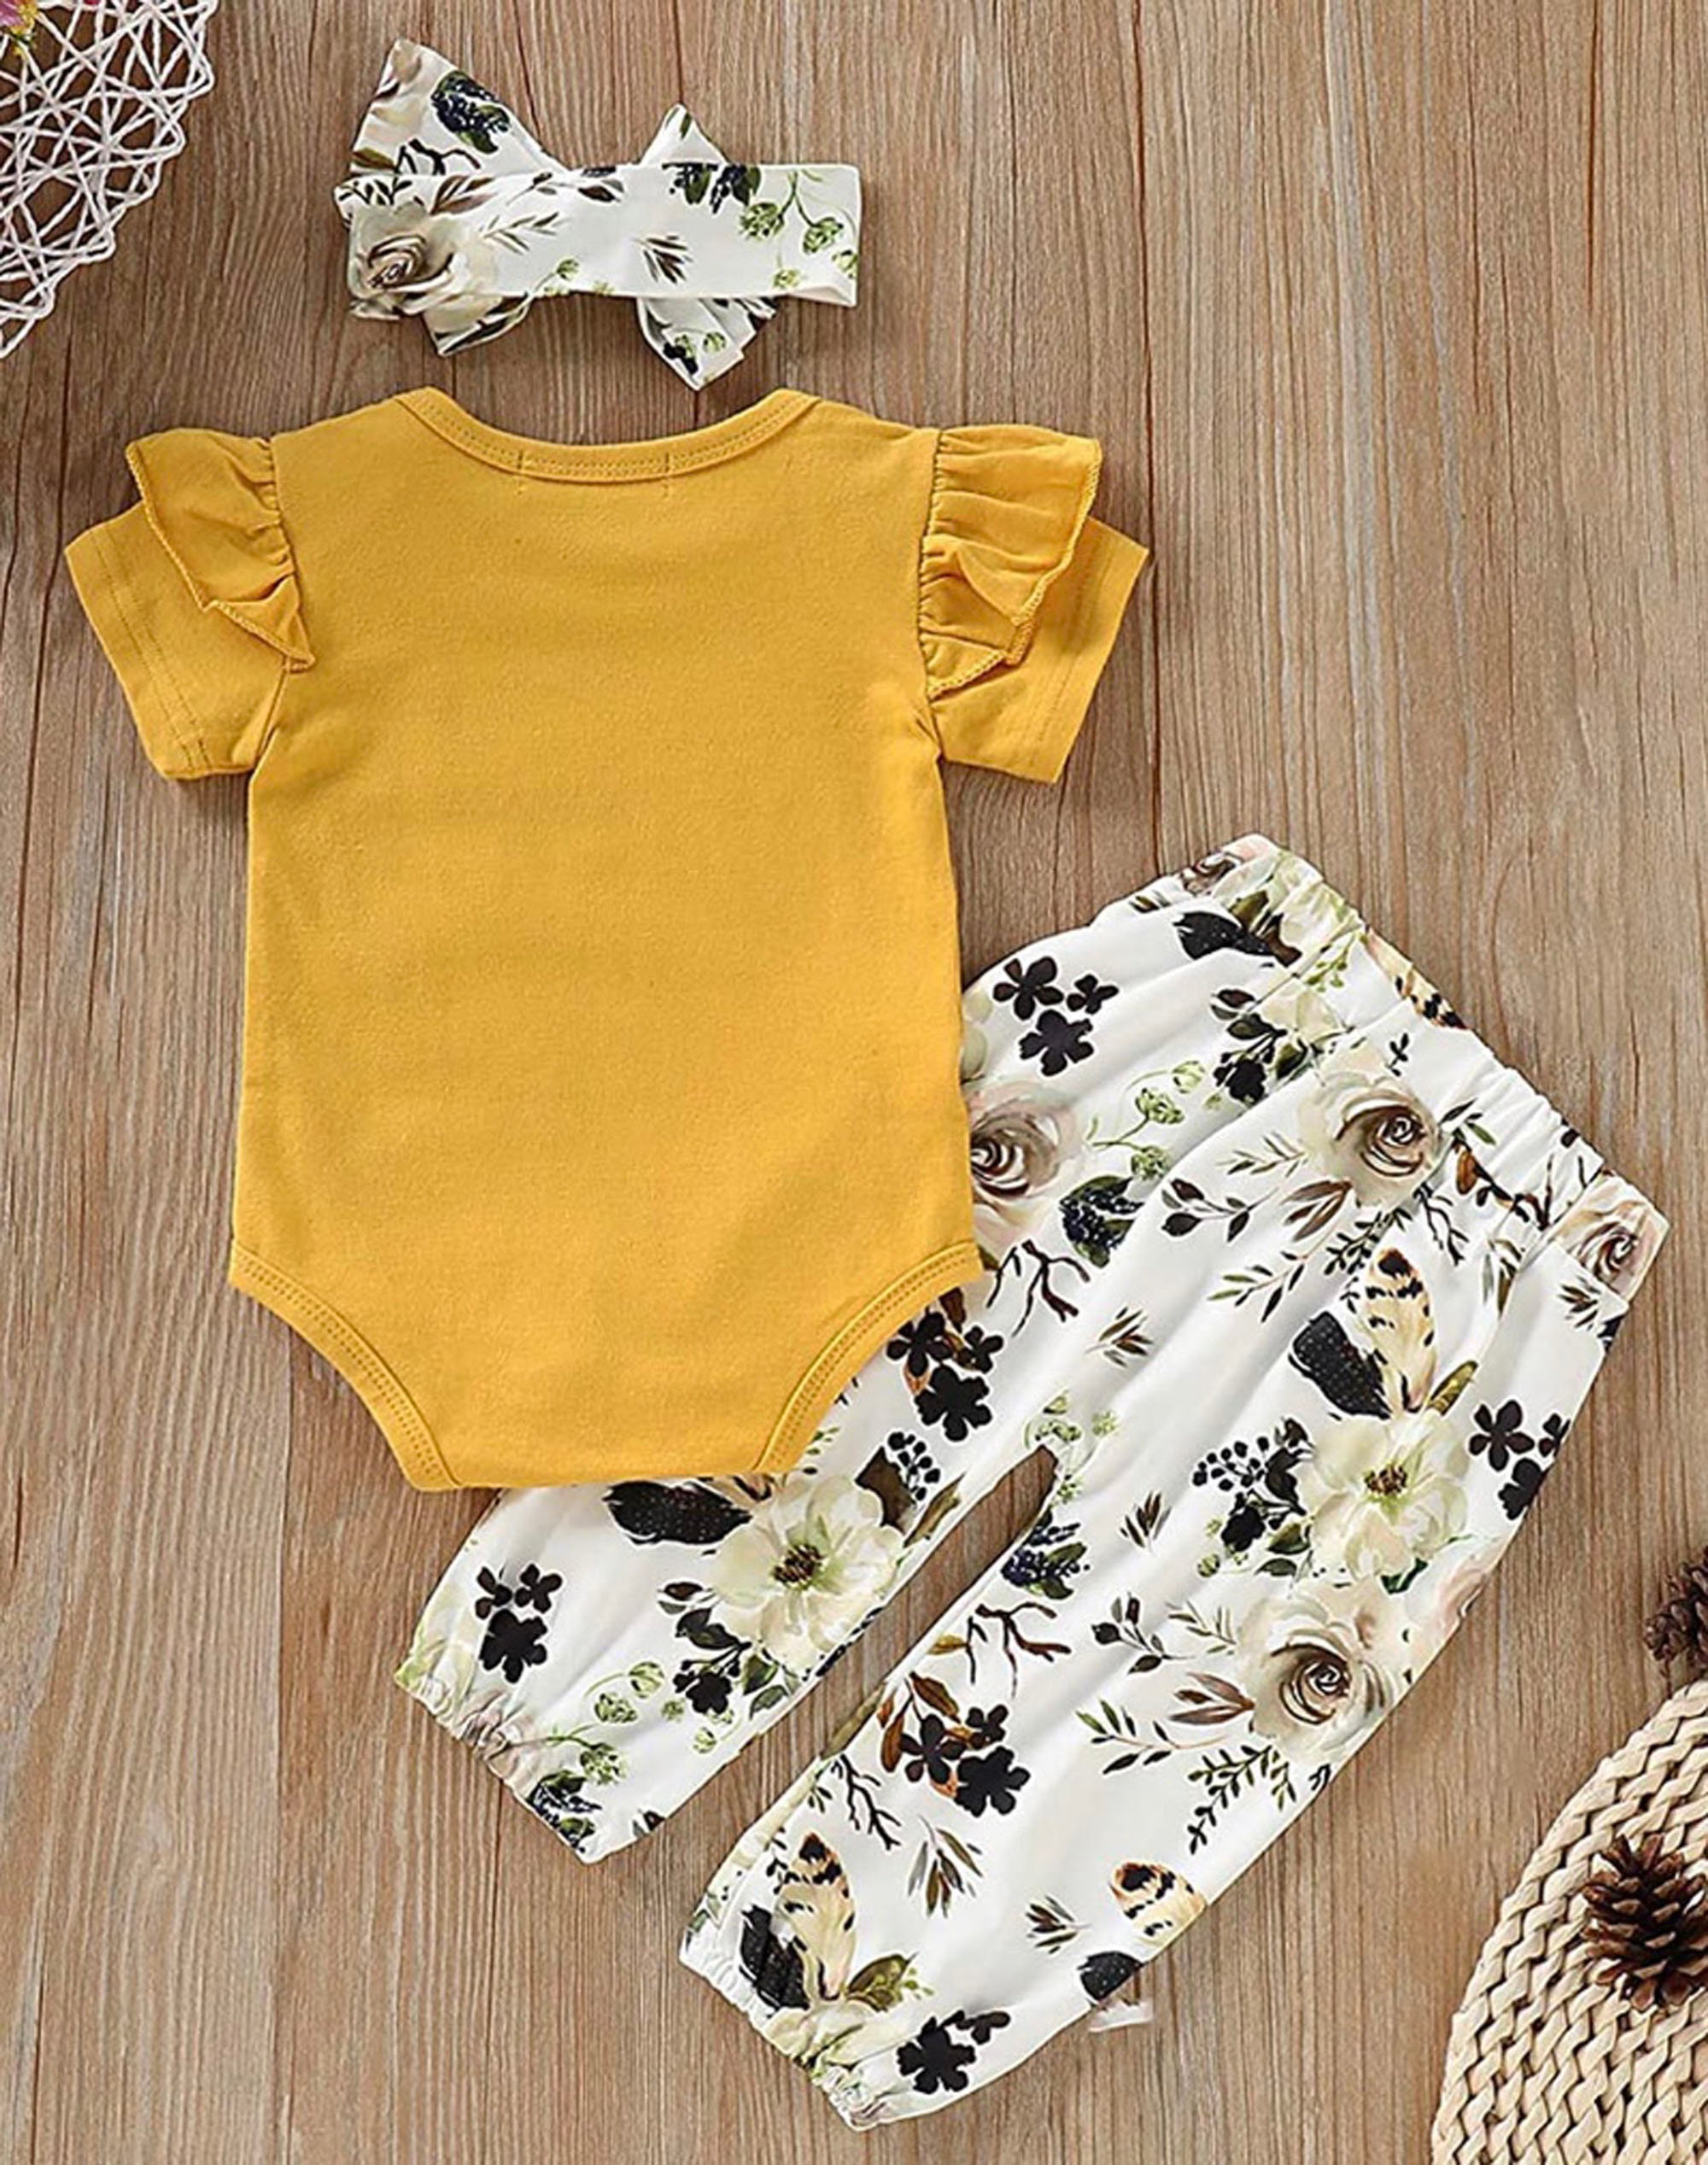 Baby Girl Fall Outfit Personalized Name Gift Newborn Onesie | Etsy